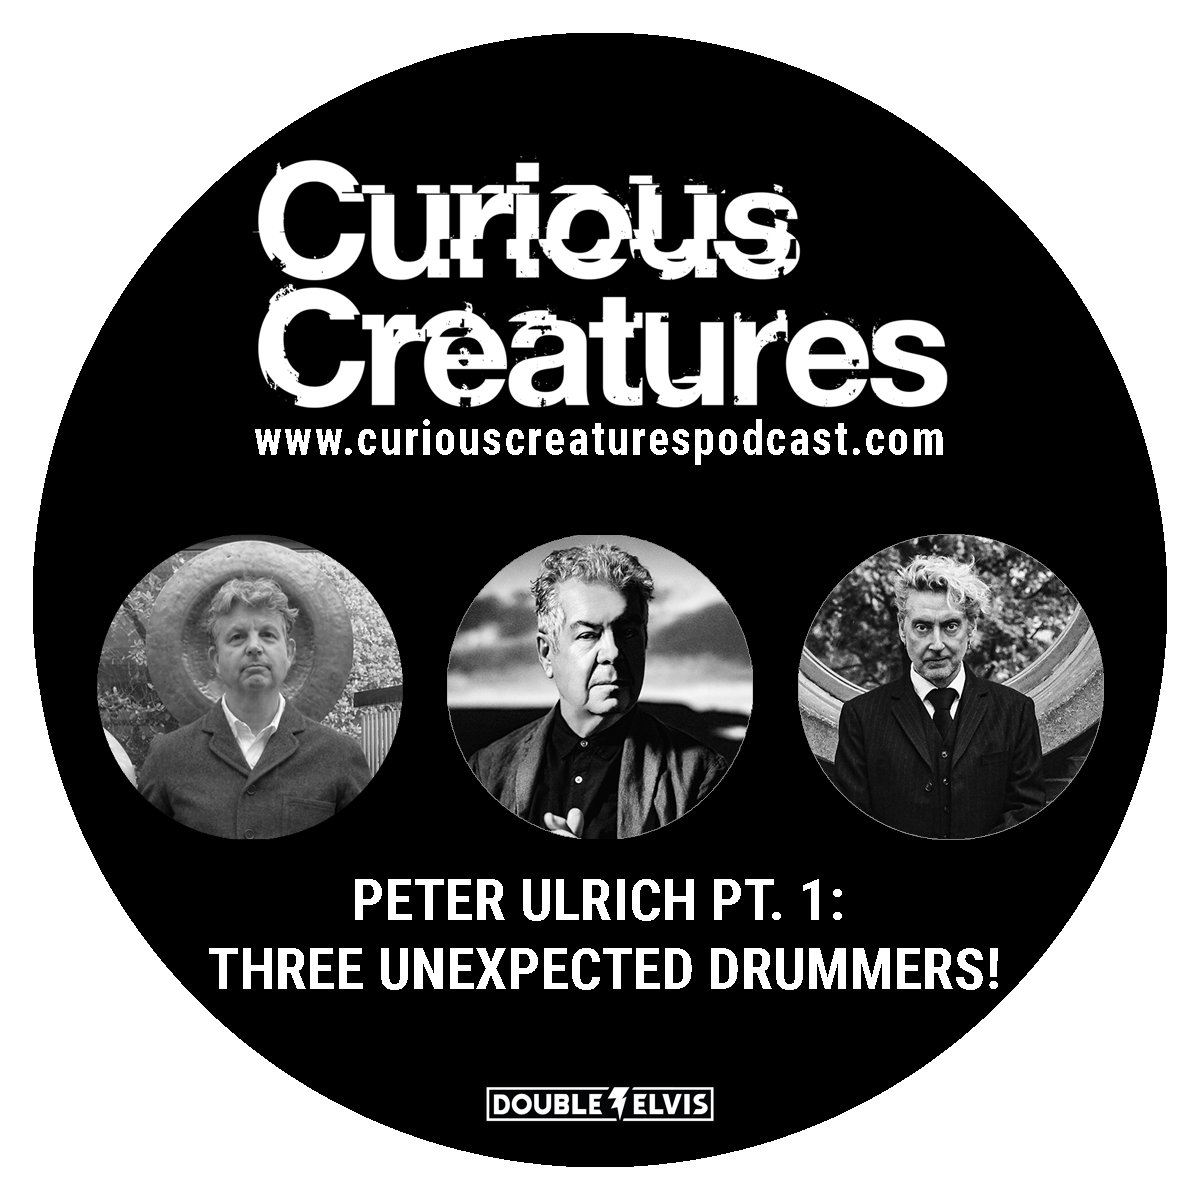 As you know, all drummers are friends, and on this week's @curecreatures we're talking to Peter Ulrich, best known for his work Dead Can Dance. We'll be chatting about memoirs, how DCD got their name, serendipitous moments along the way and much more.